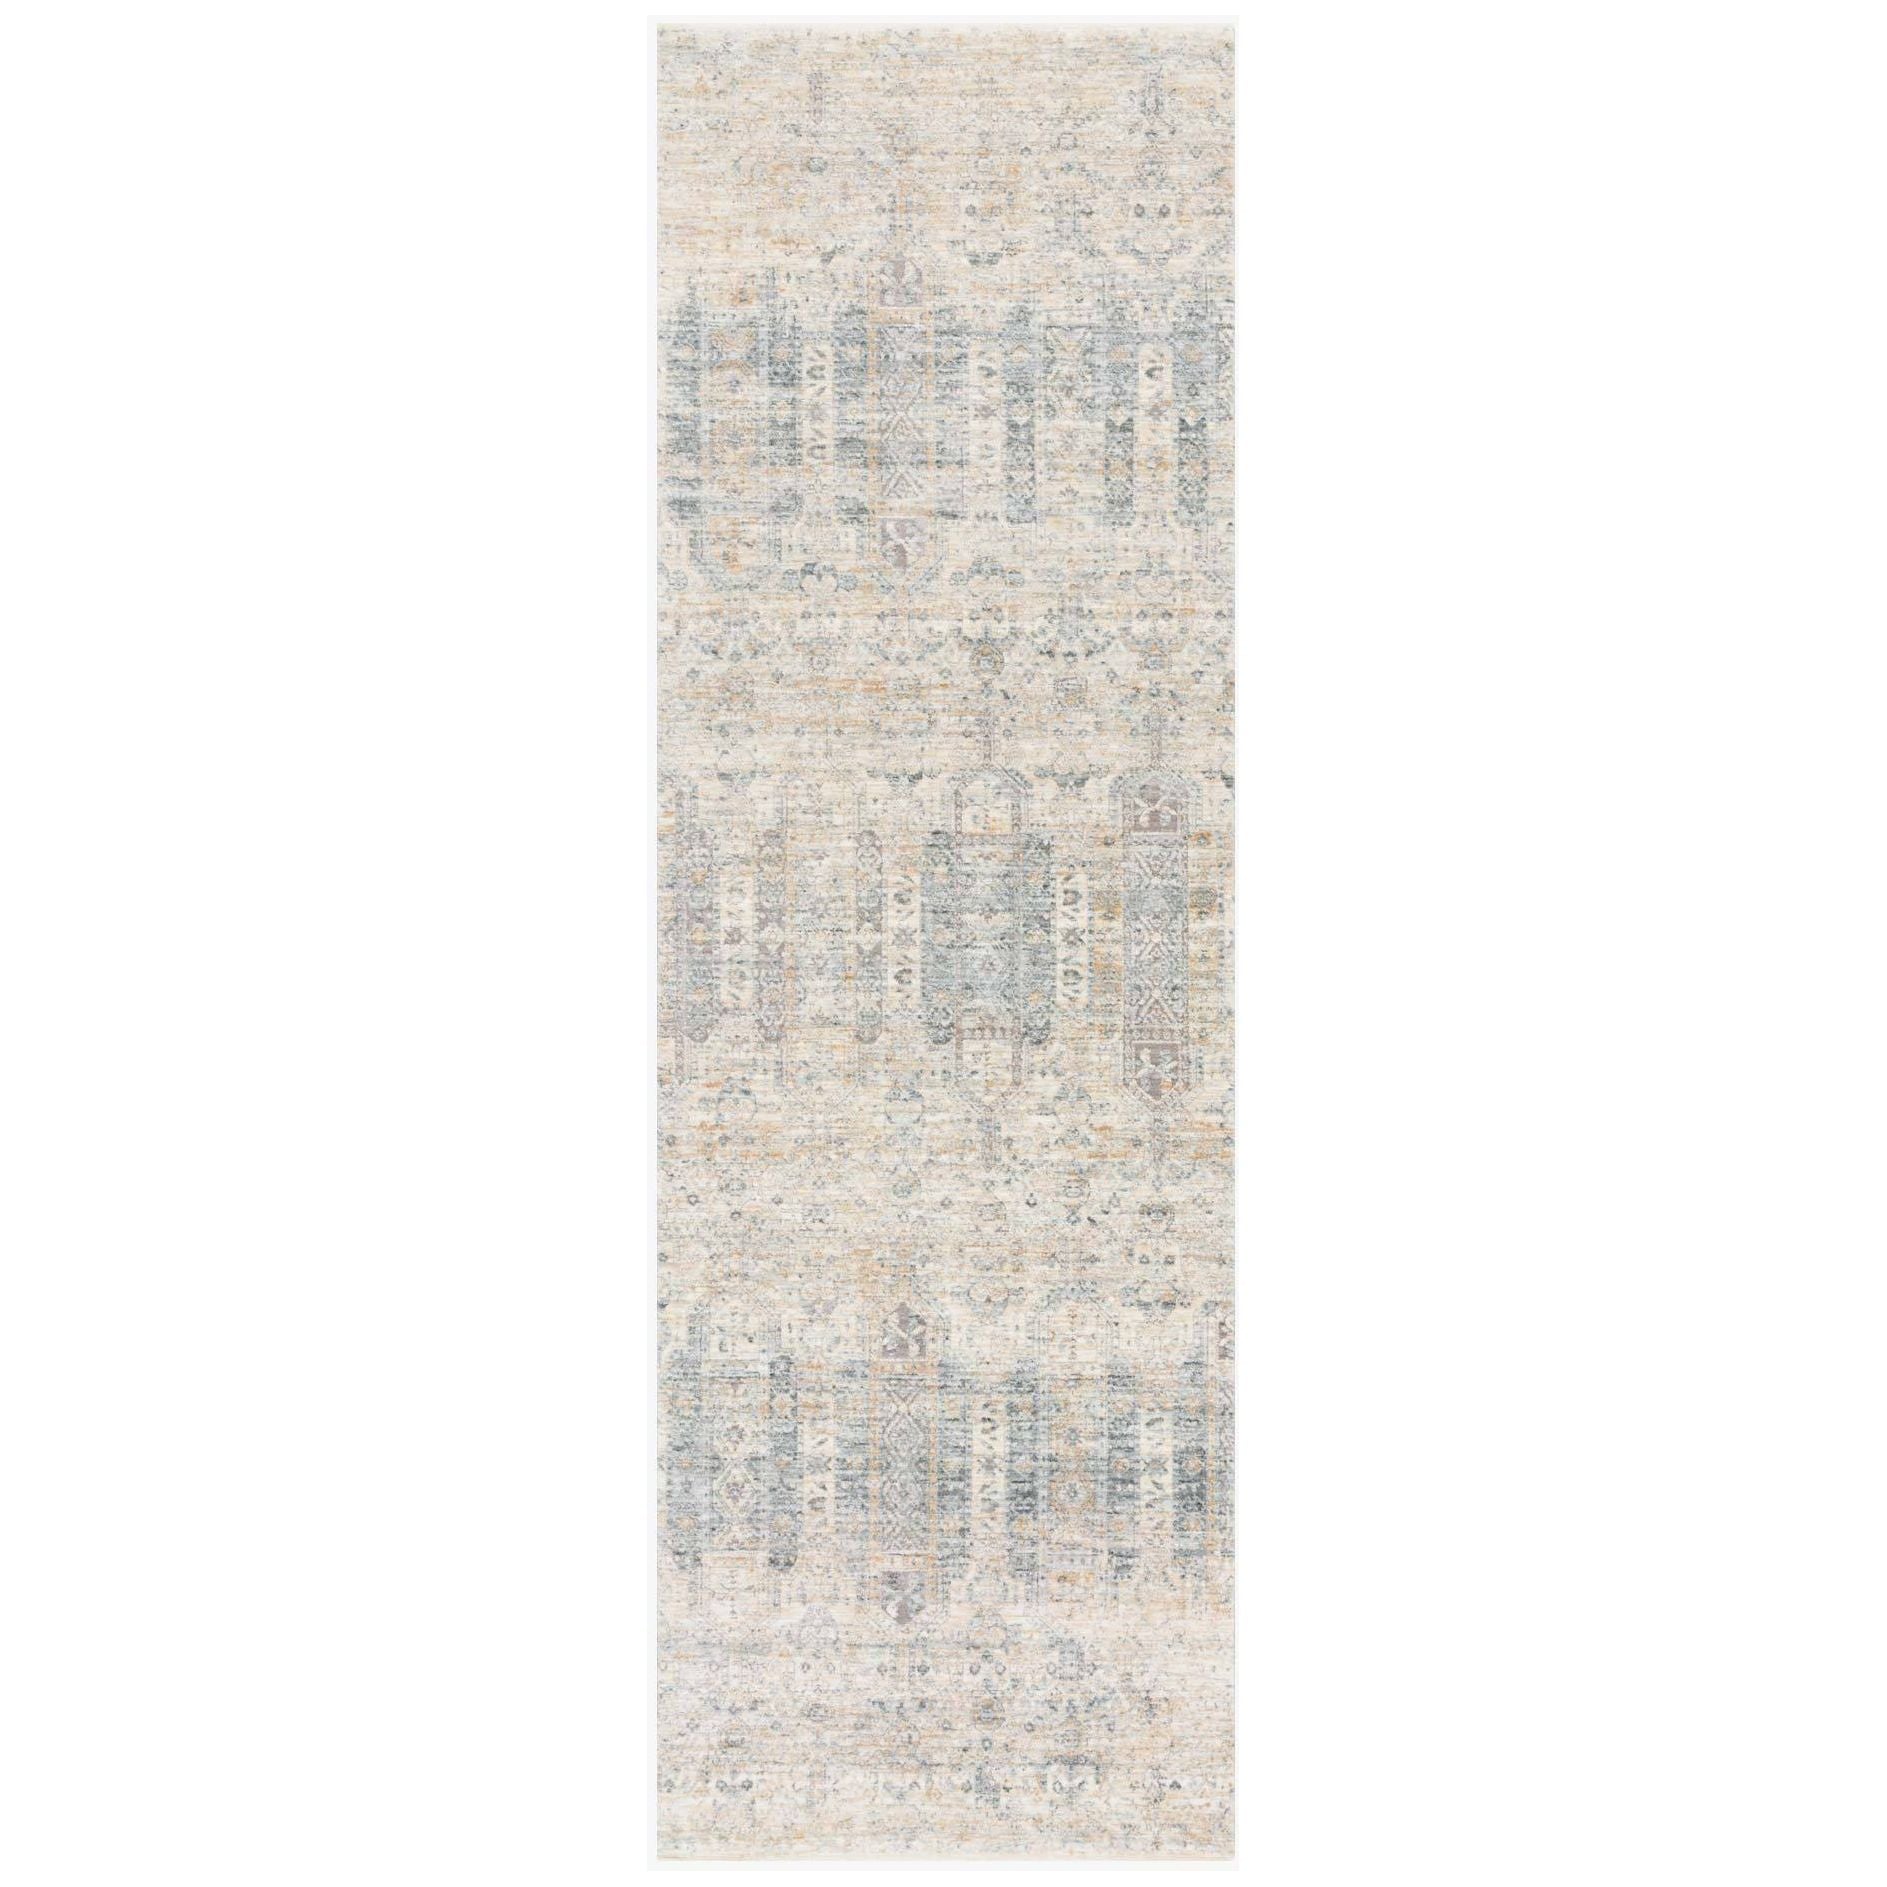 The Pandora Ivory/Mist PAN-02 Rug is power-loomed of 100% polyester, ensuring long-lasting durability, no shedding, and a soft feel underfoot. The pile features a high to low texture making it great for living rooms, bedrooms, or any room where you want cozy and comfortable texture on the floor!